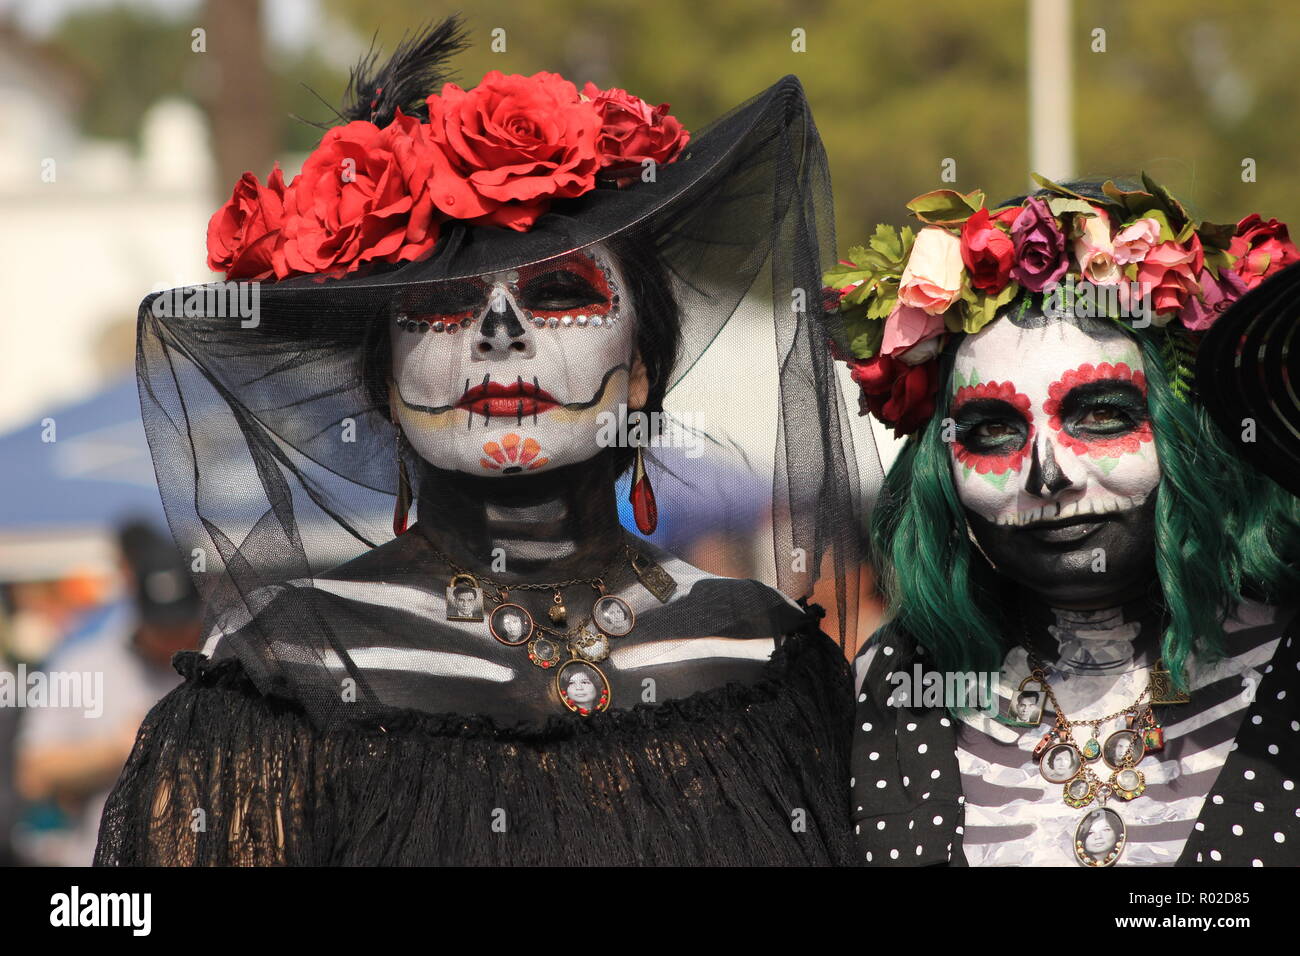 Woman with beautiful sugar skull makeup (Catrina) during Day of the Dead celebration (Dia de los Muertos) Stock Photo